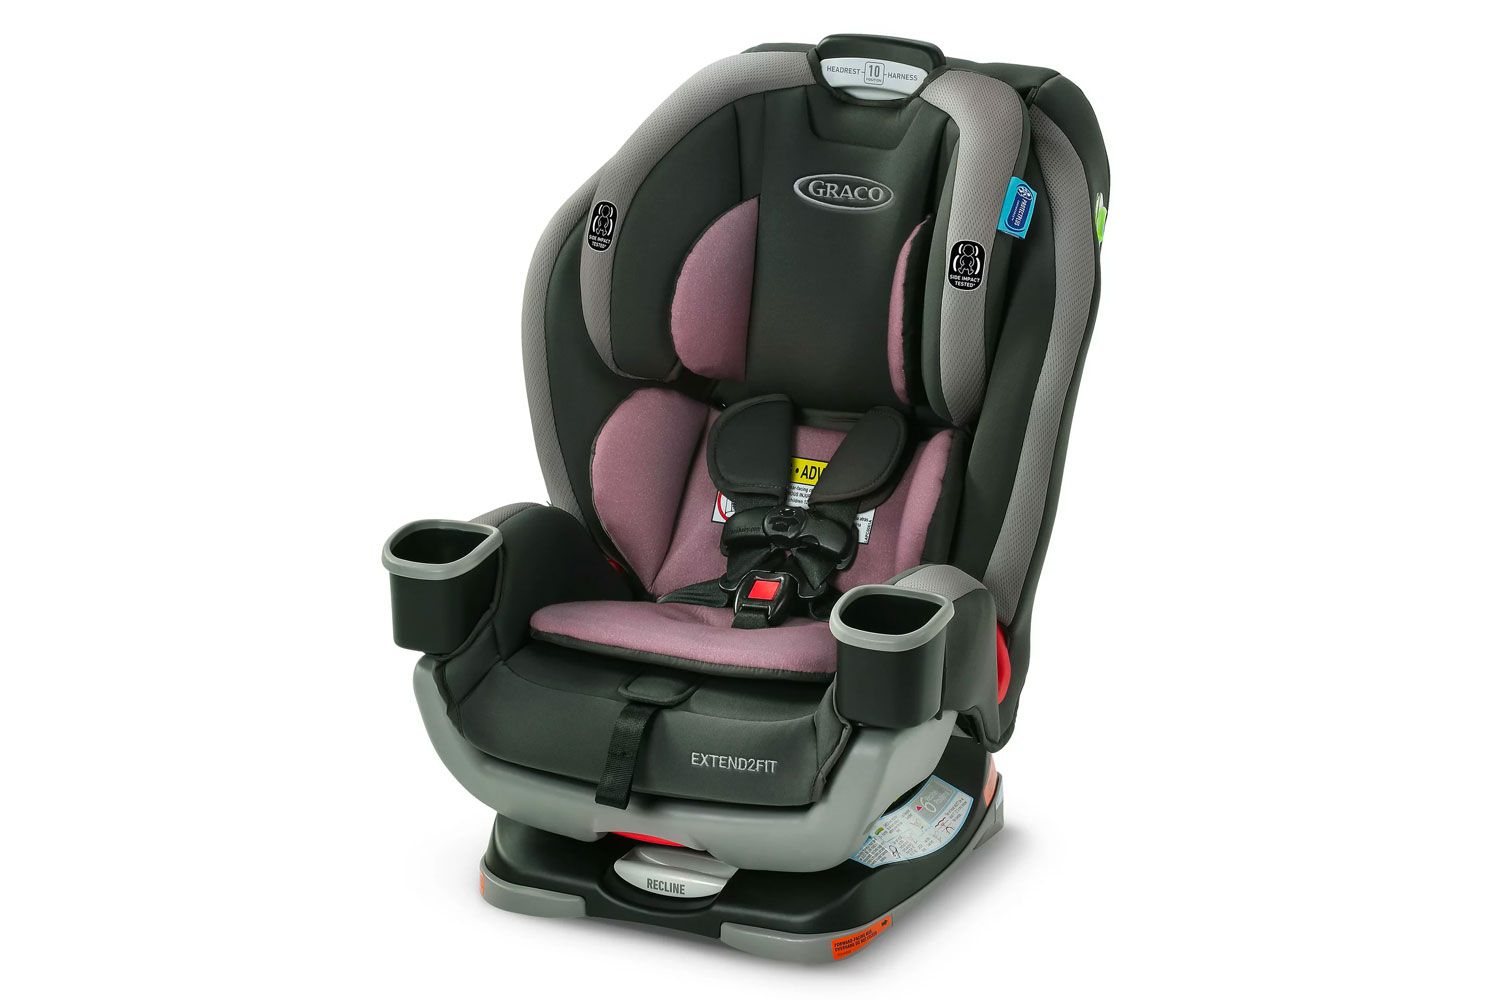 Walmart Graco Extend2Fit 3-in-1 Car Seat